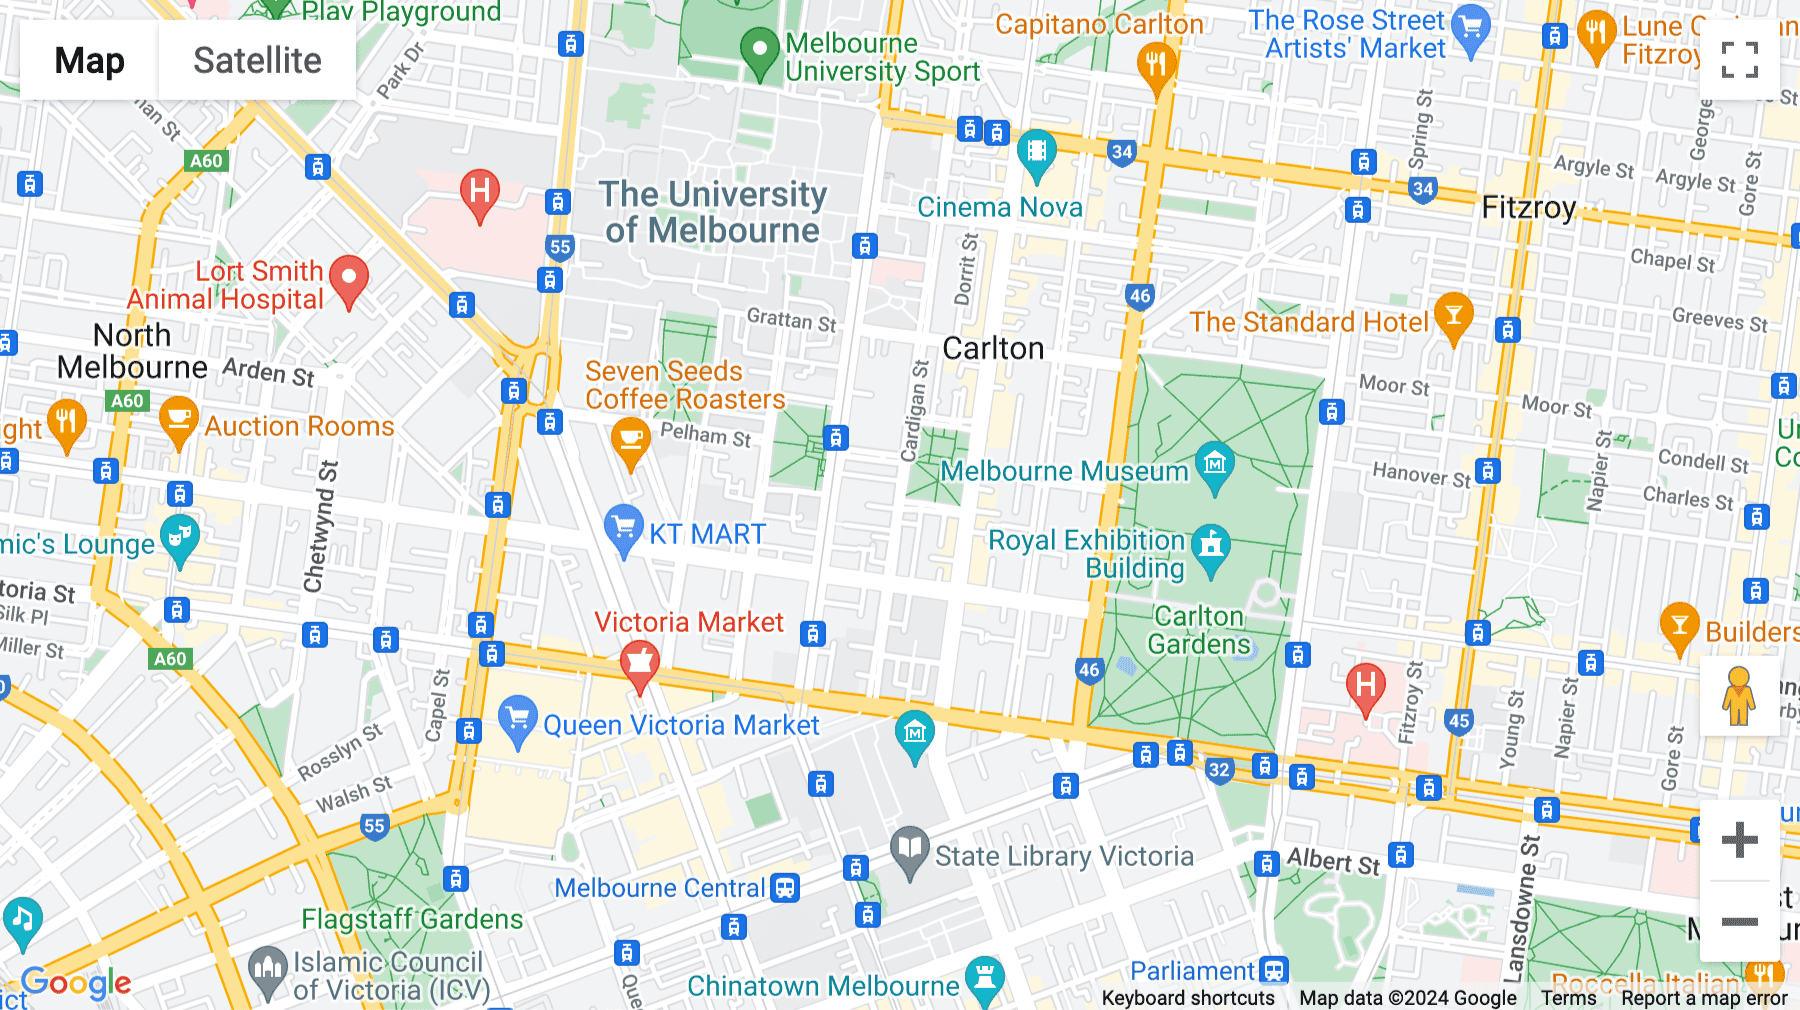 Click for interative map of 141 Cardigan Street, Carlton (Melbourne), Melbourne